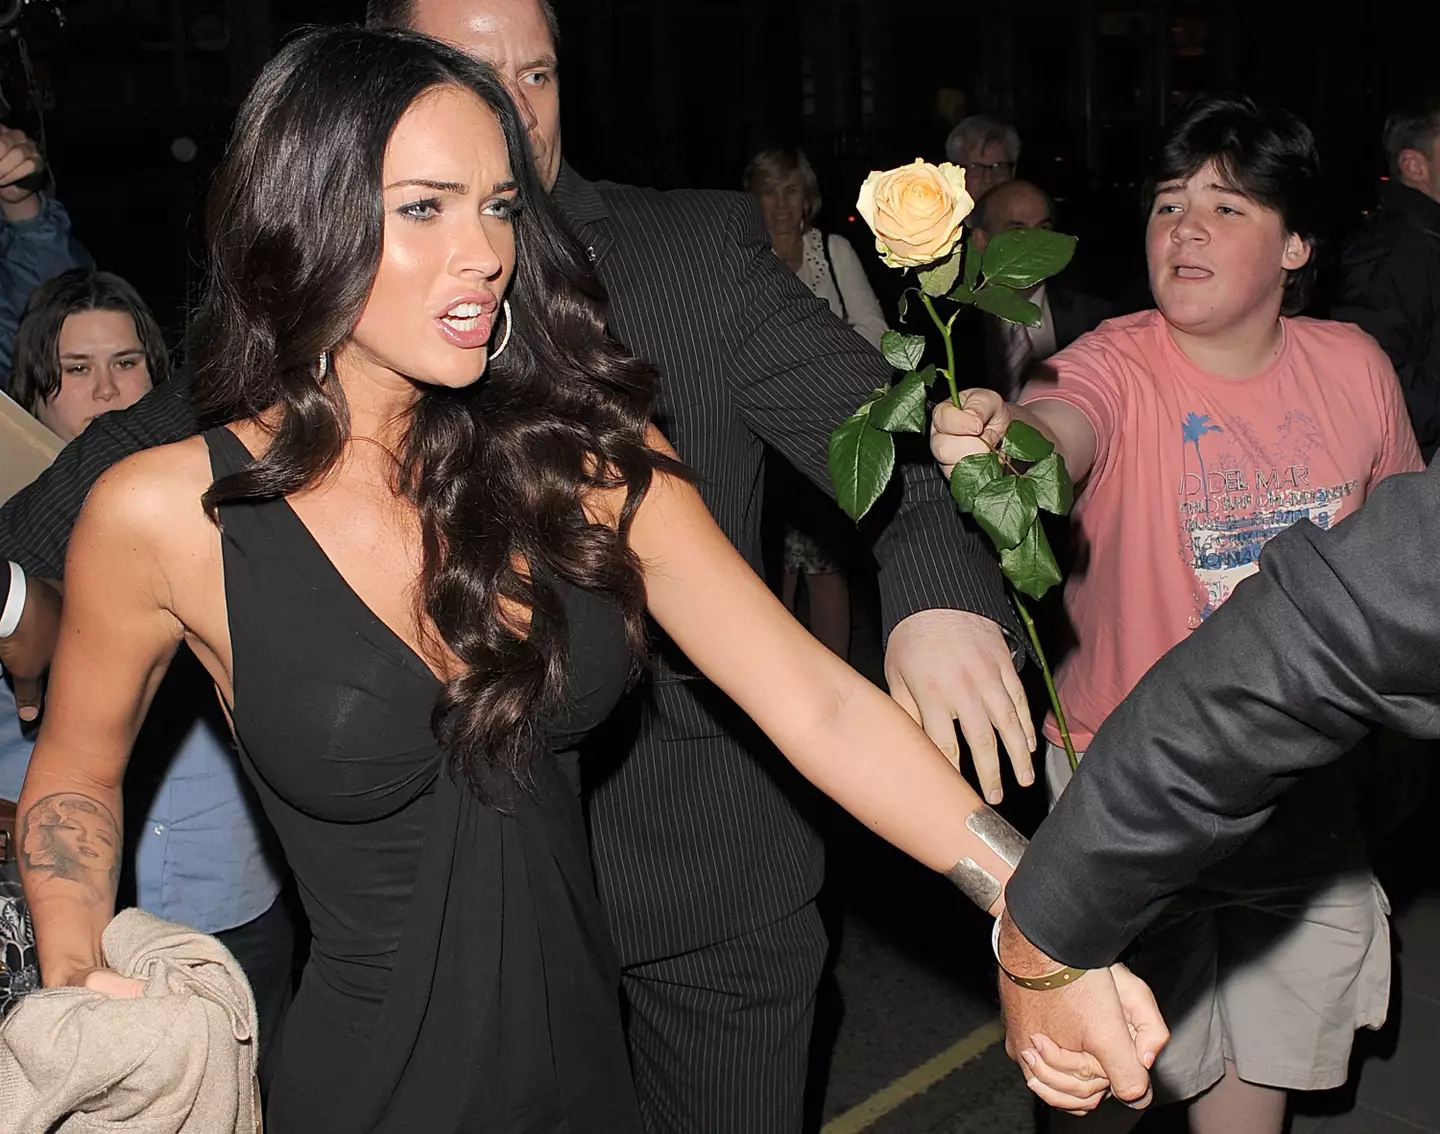 Harvey attempted to give Megan Fox a rose while she was promoting Transformers: Revenge of the Fallen.